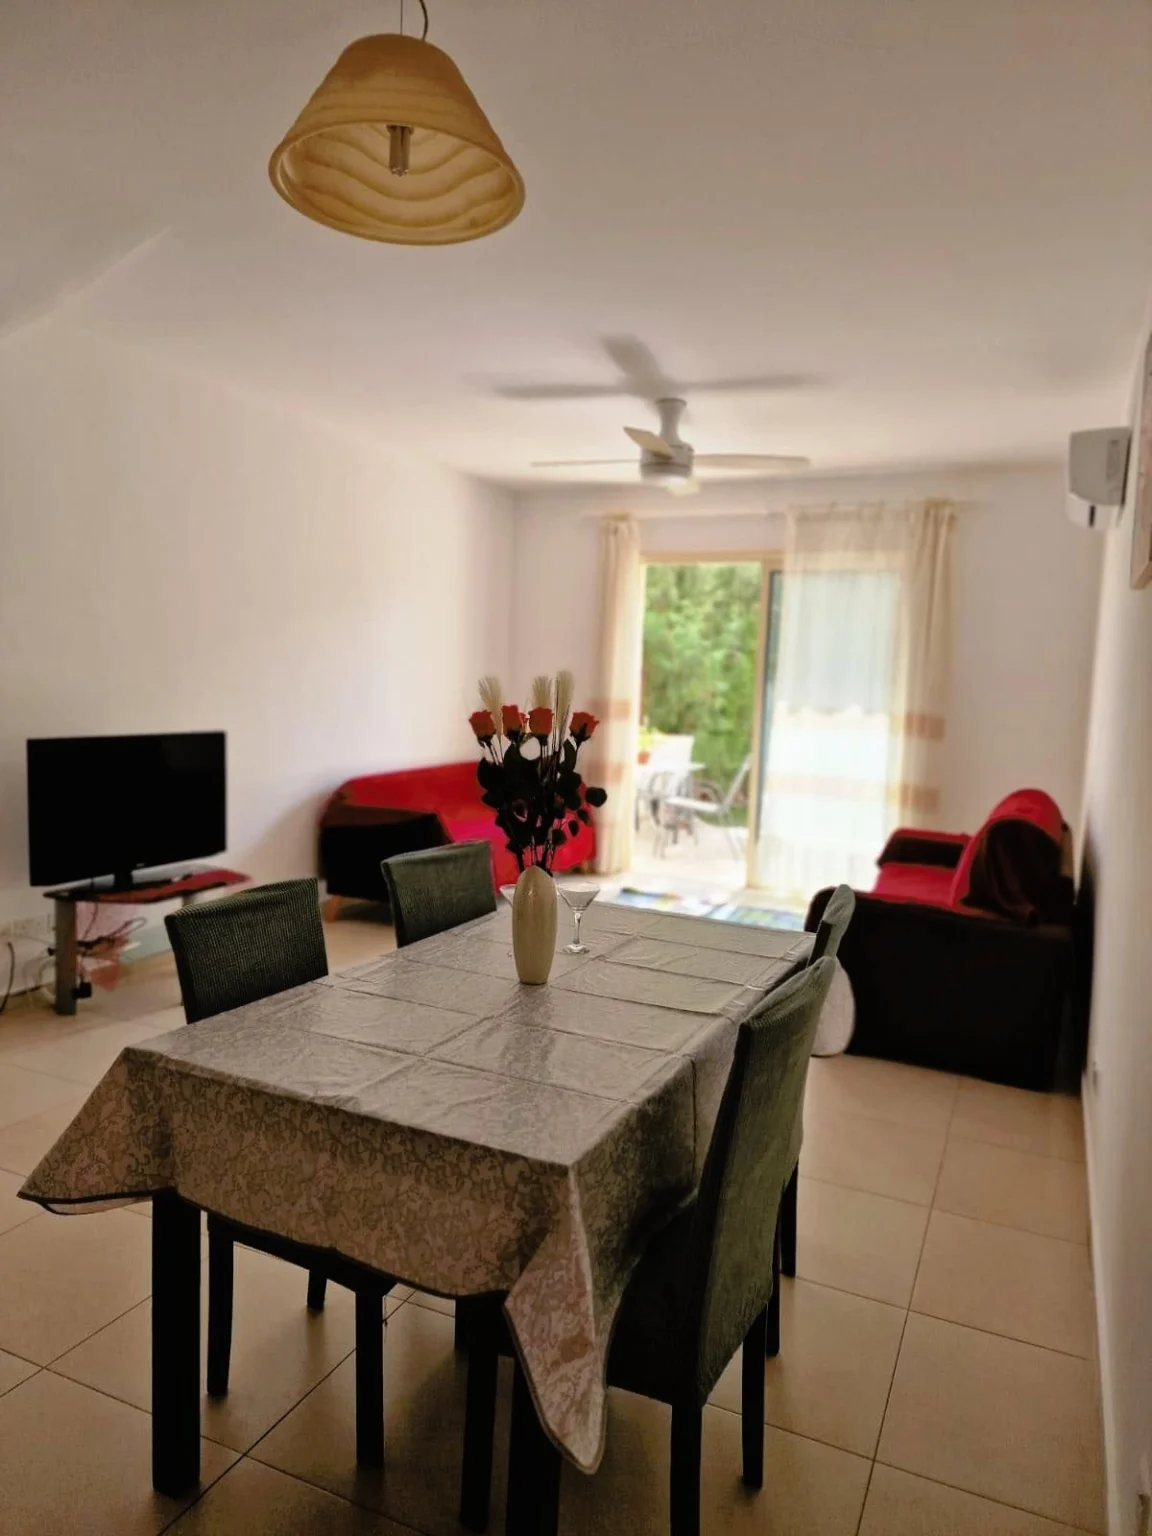 2 Bedroom House for Rent in Paphos – Universal